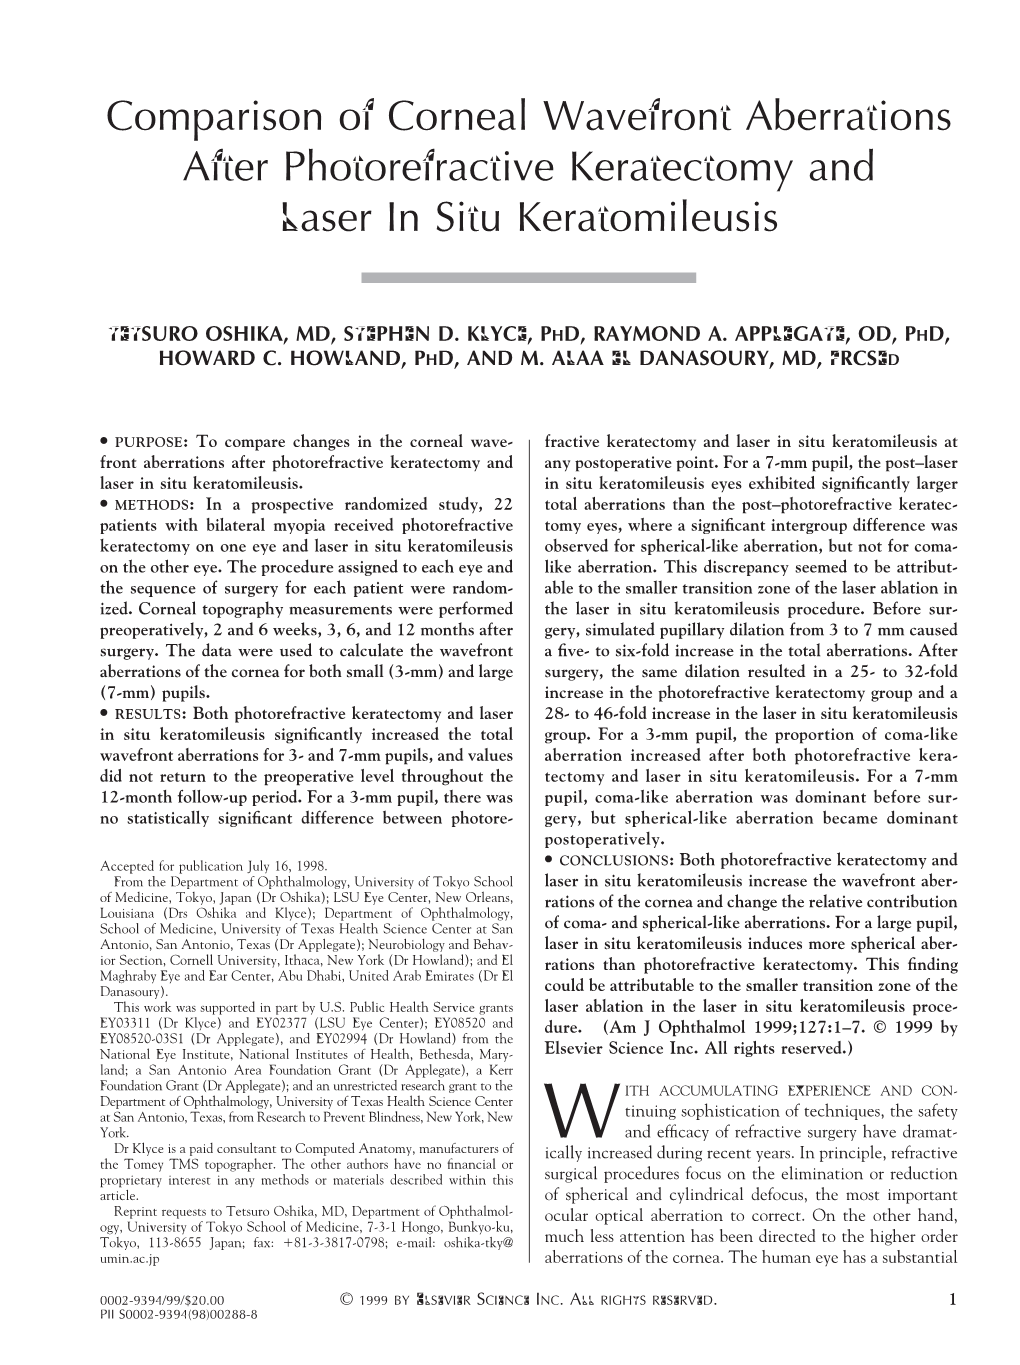 Comparison of Corneal Wavefront Aberrations After Photorefractive Keratectomy and Laser in Situ Keratomileusis